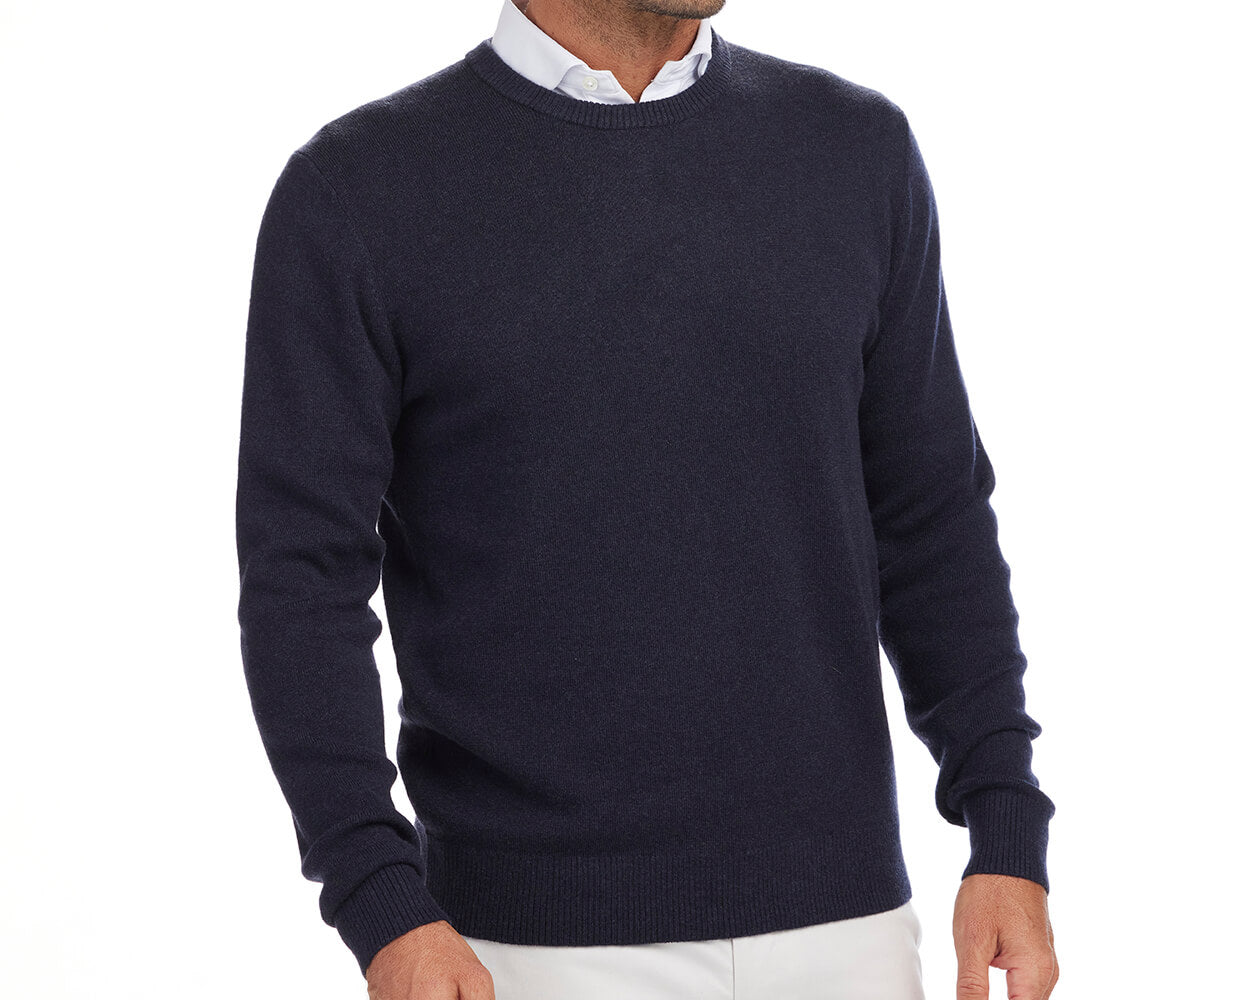 Front shot of Holderness and Bourne navy golf cashmere sweater modeled on man's torso.